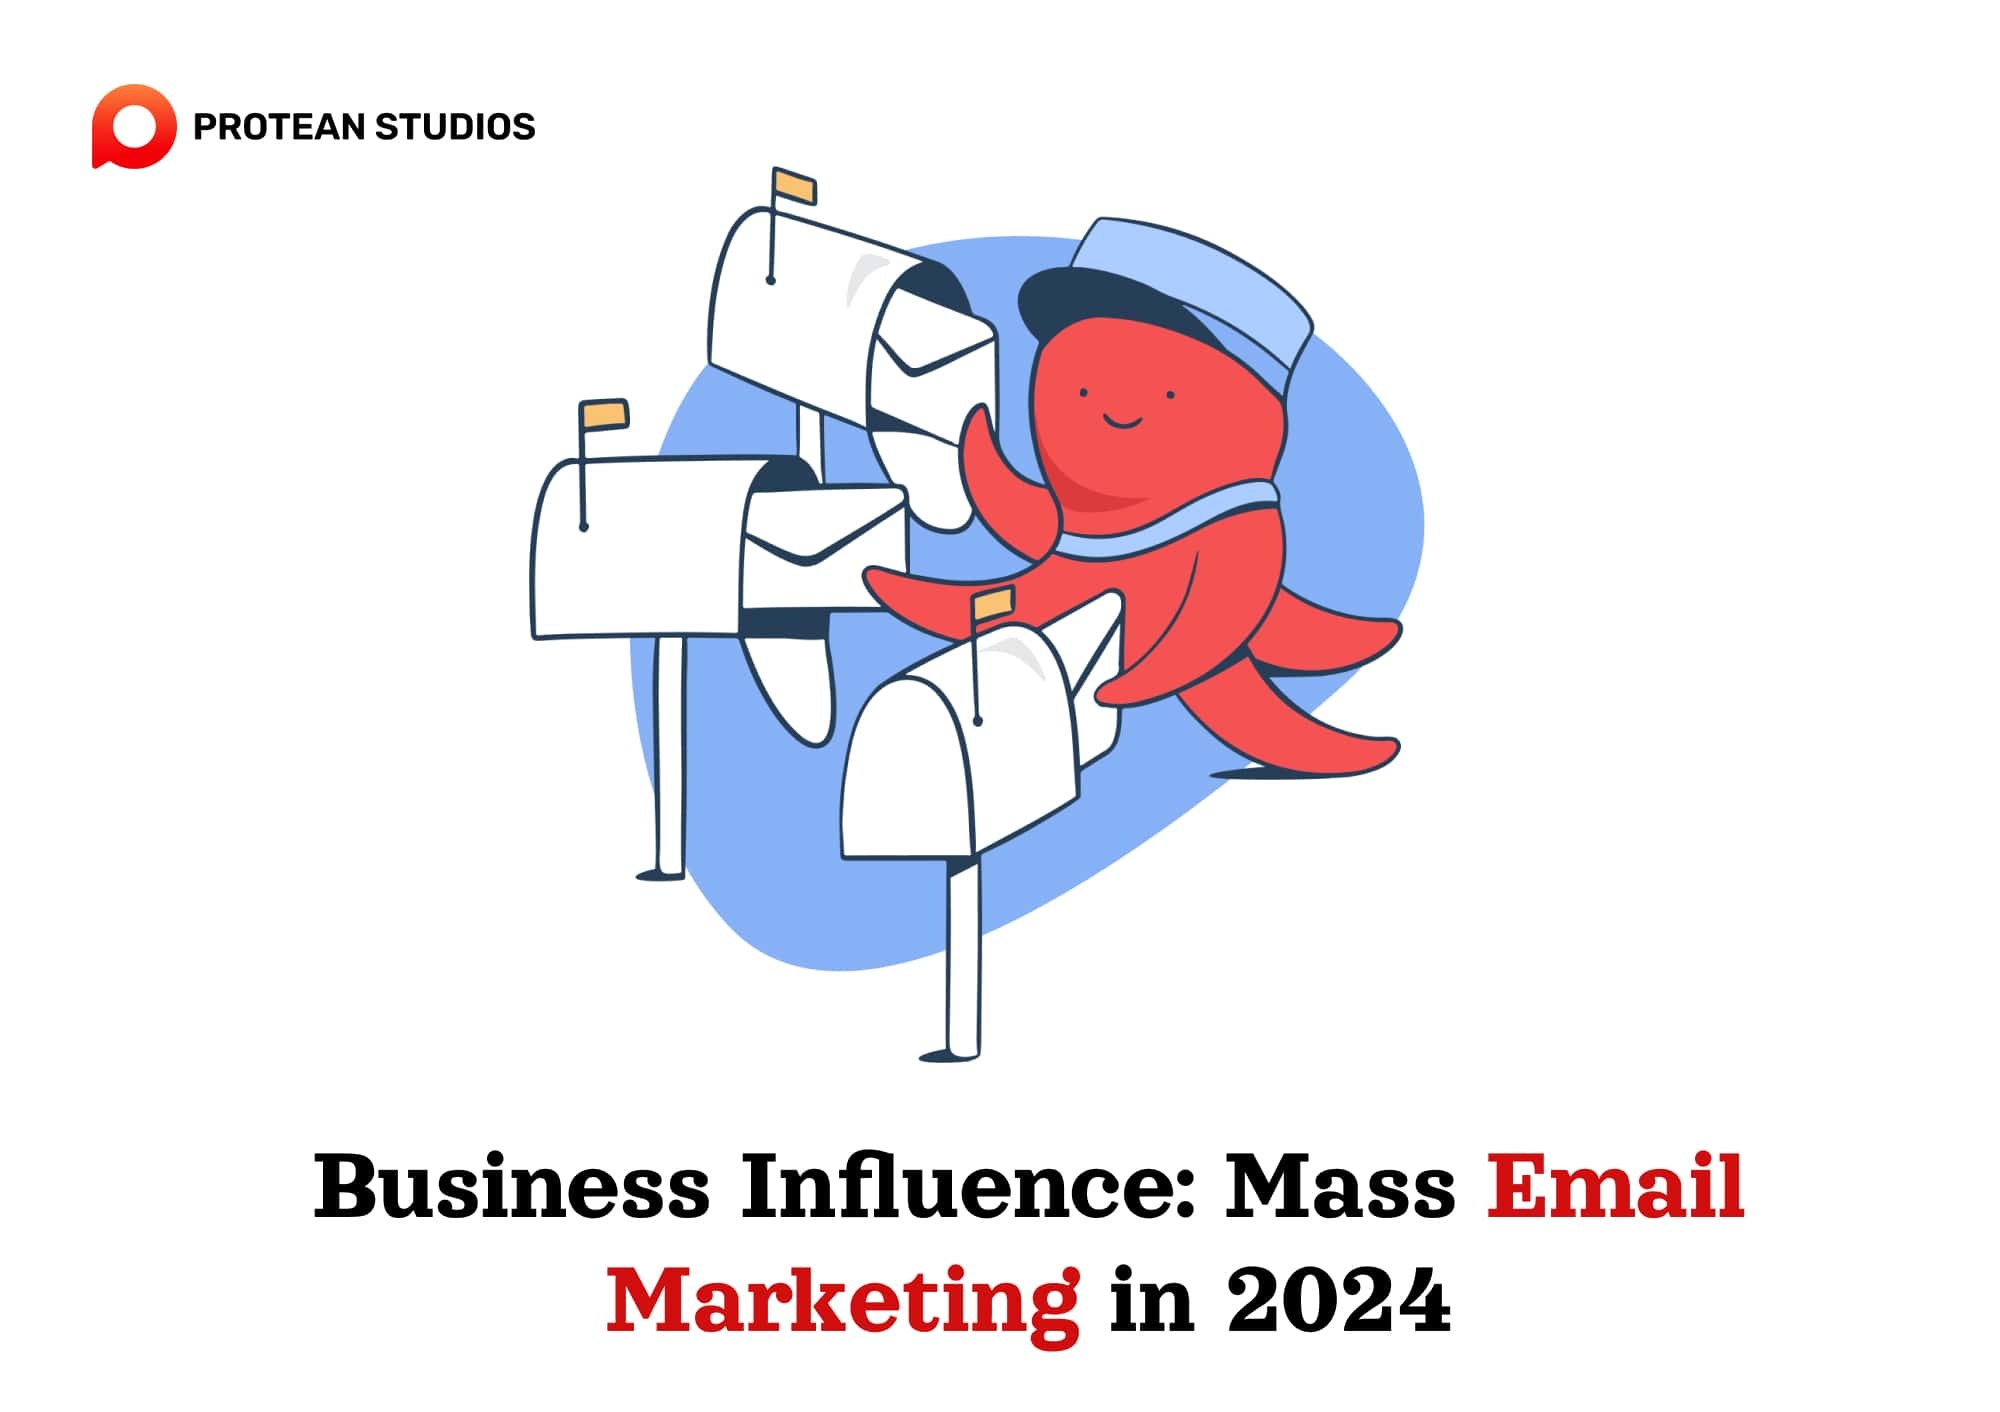 Tips for businesses when using mass emails